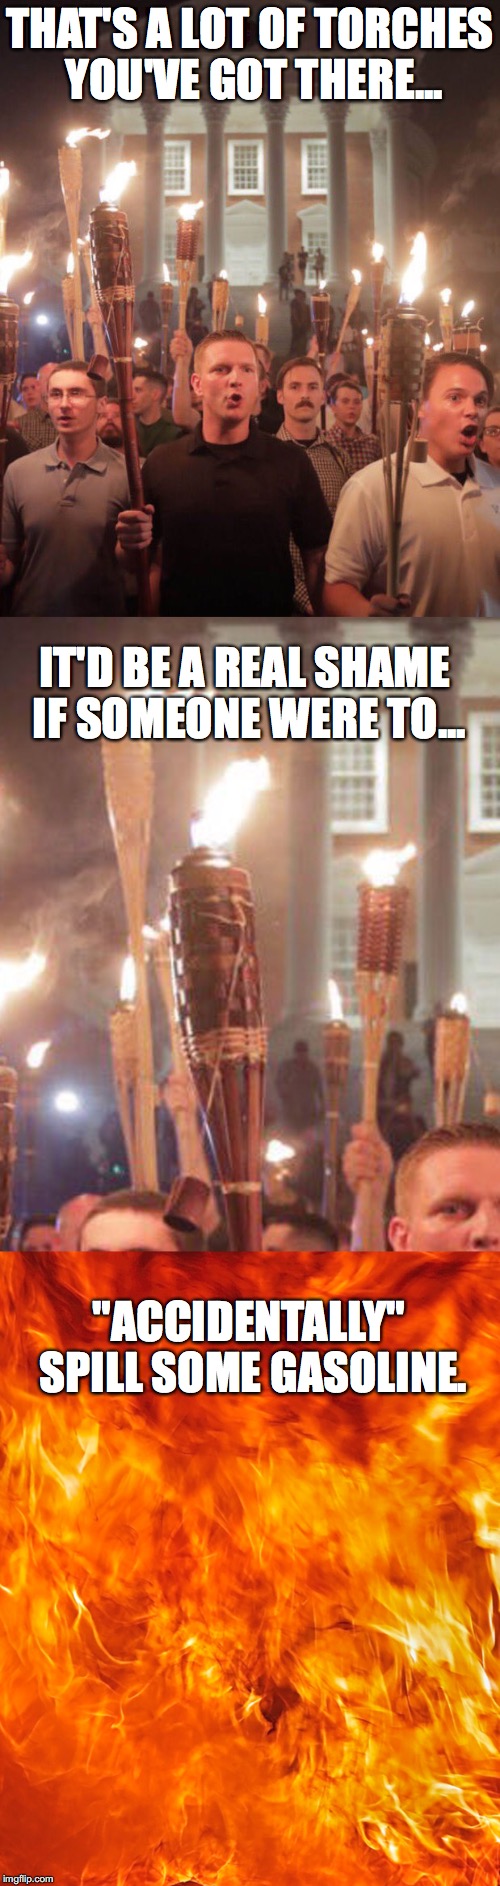 The only good nazi is a dead nazi. | THAT'S A LOT OF TORCHES YOU'VE GOT THERE... IT'D BE A REAL SHAME IF SOMEONE WERE TO... "ACCIDENTALLY" SPILL SOME GASOLINE. | image tagged in charlottesville,kkk,alt right,nazi,donald trump | made w/ Imgflip meme maker